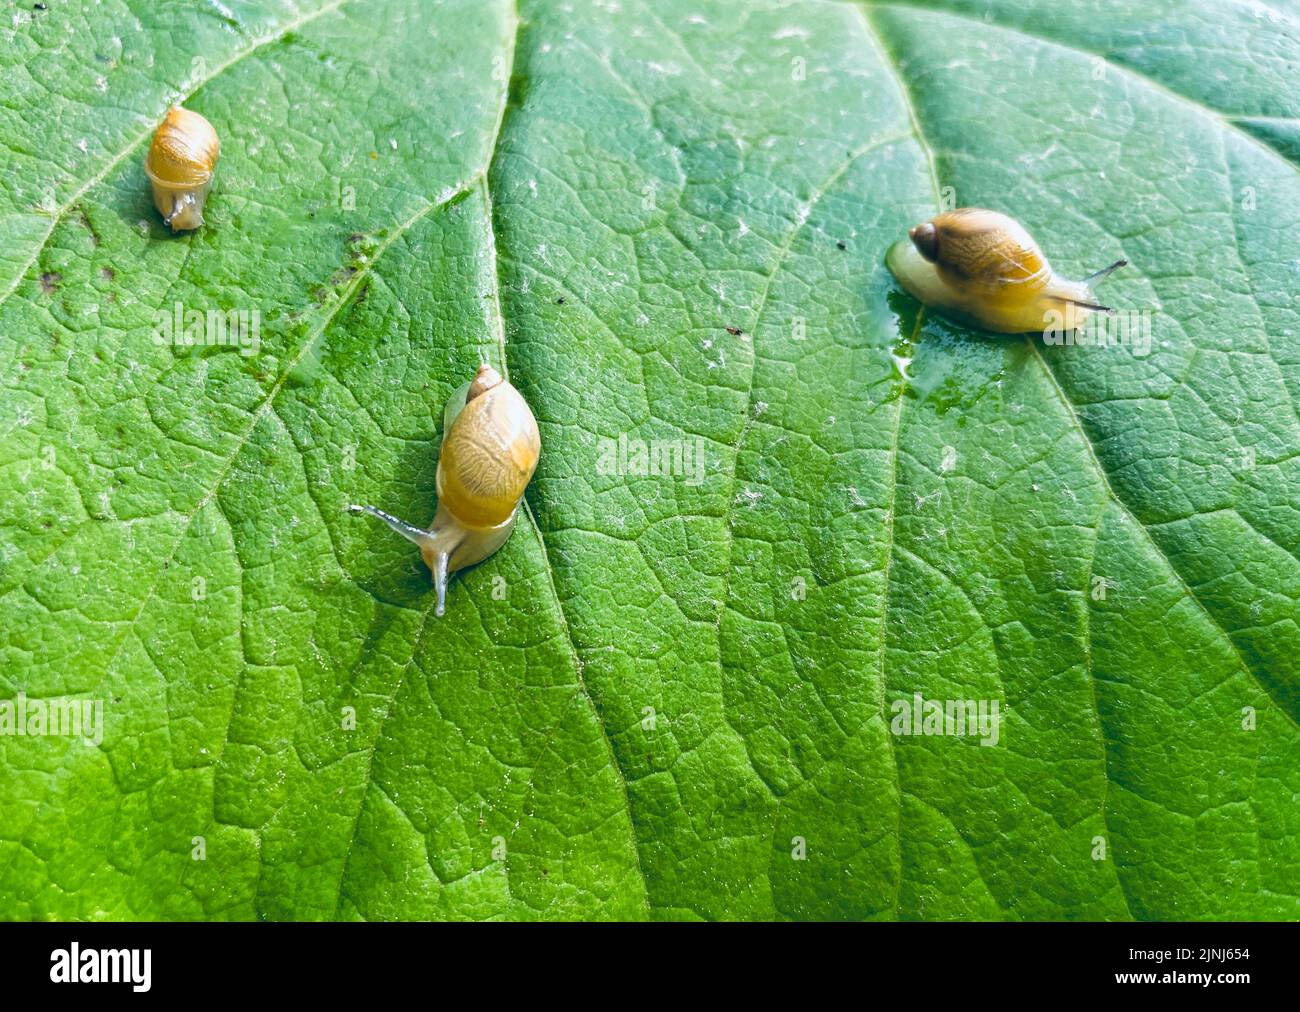 Three baby snails on a large green leaf Stock Photo